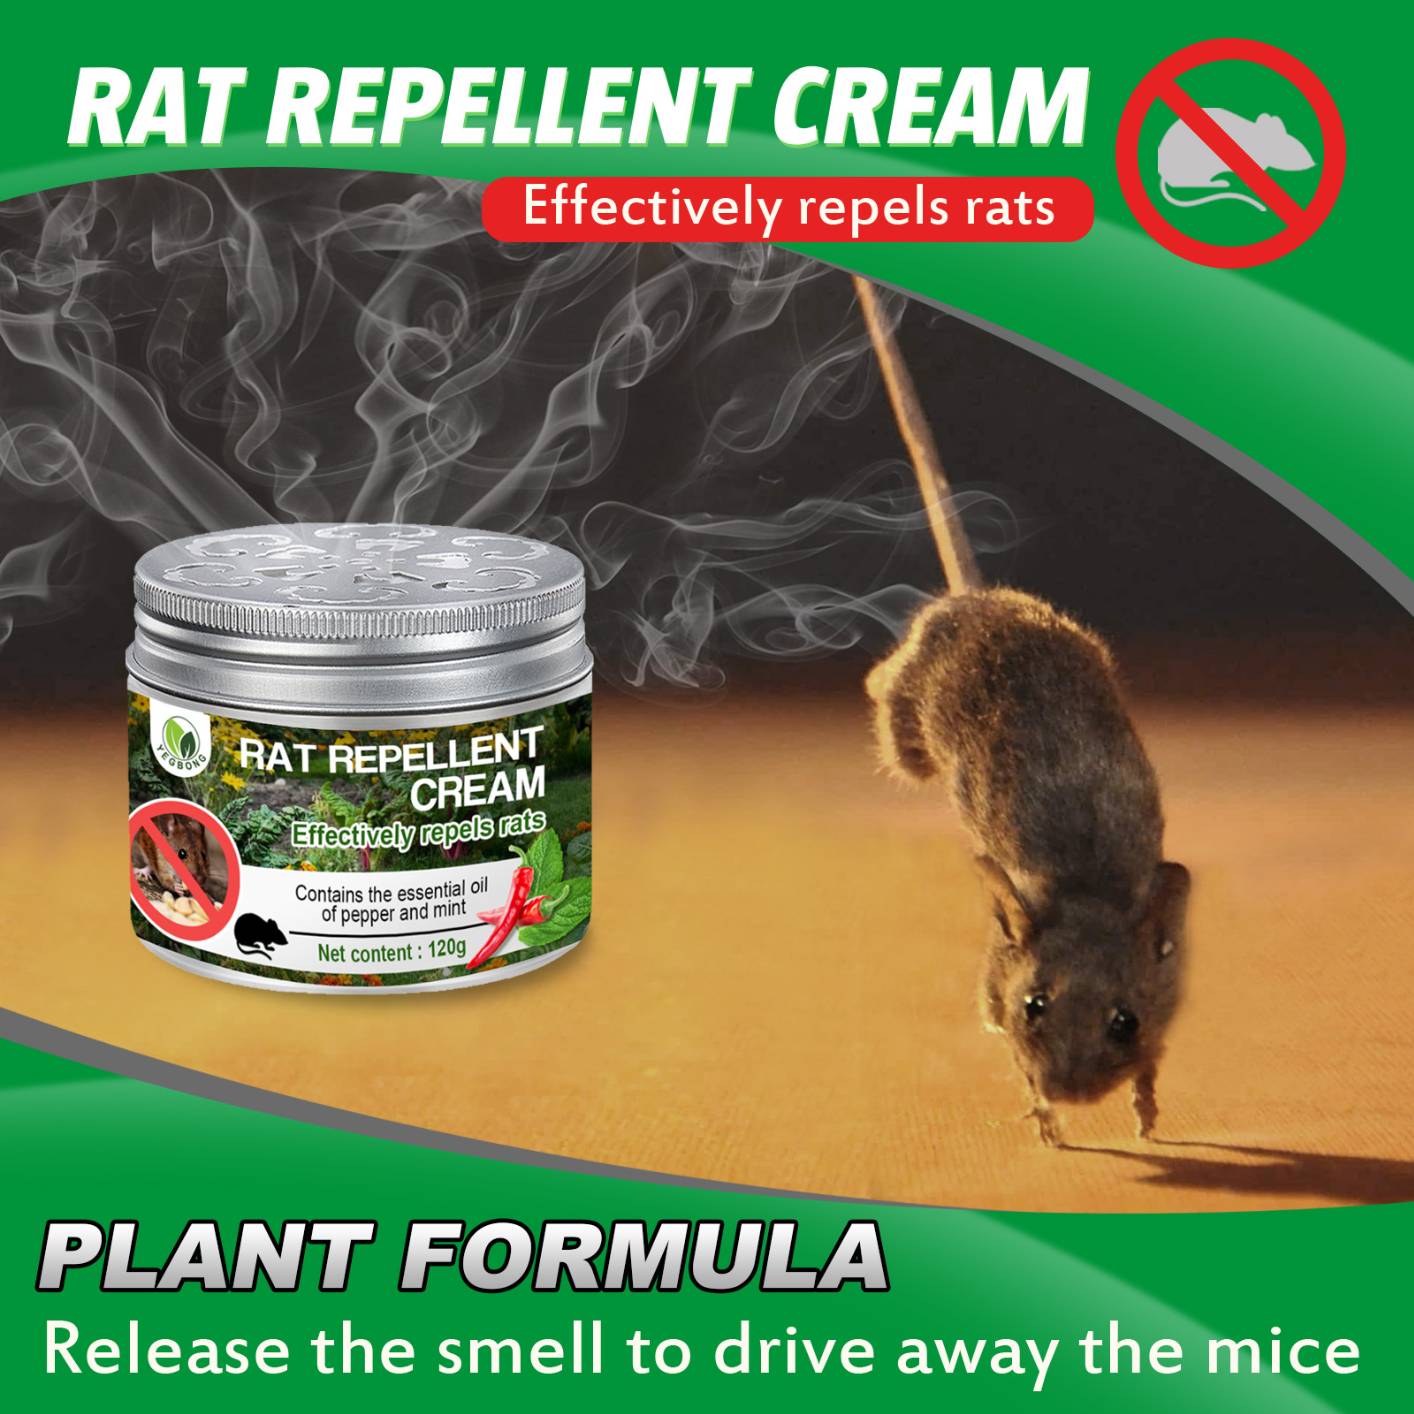 Rodent Repellent Cream for Car Engines to Keep Mice Out, Mouse Repellent Deterrent Peppermint Oil to Repelling Mice and Rats, Rat Repellent Perfect for Home Garages RV Closets Trucks